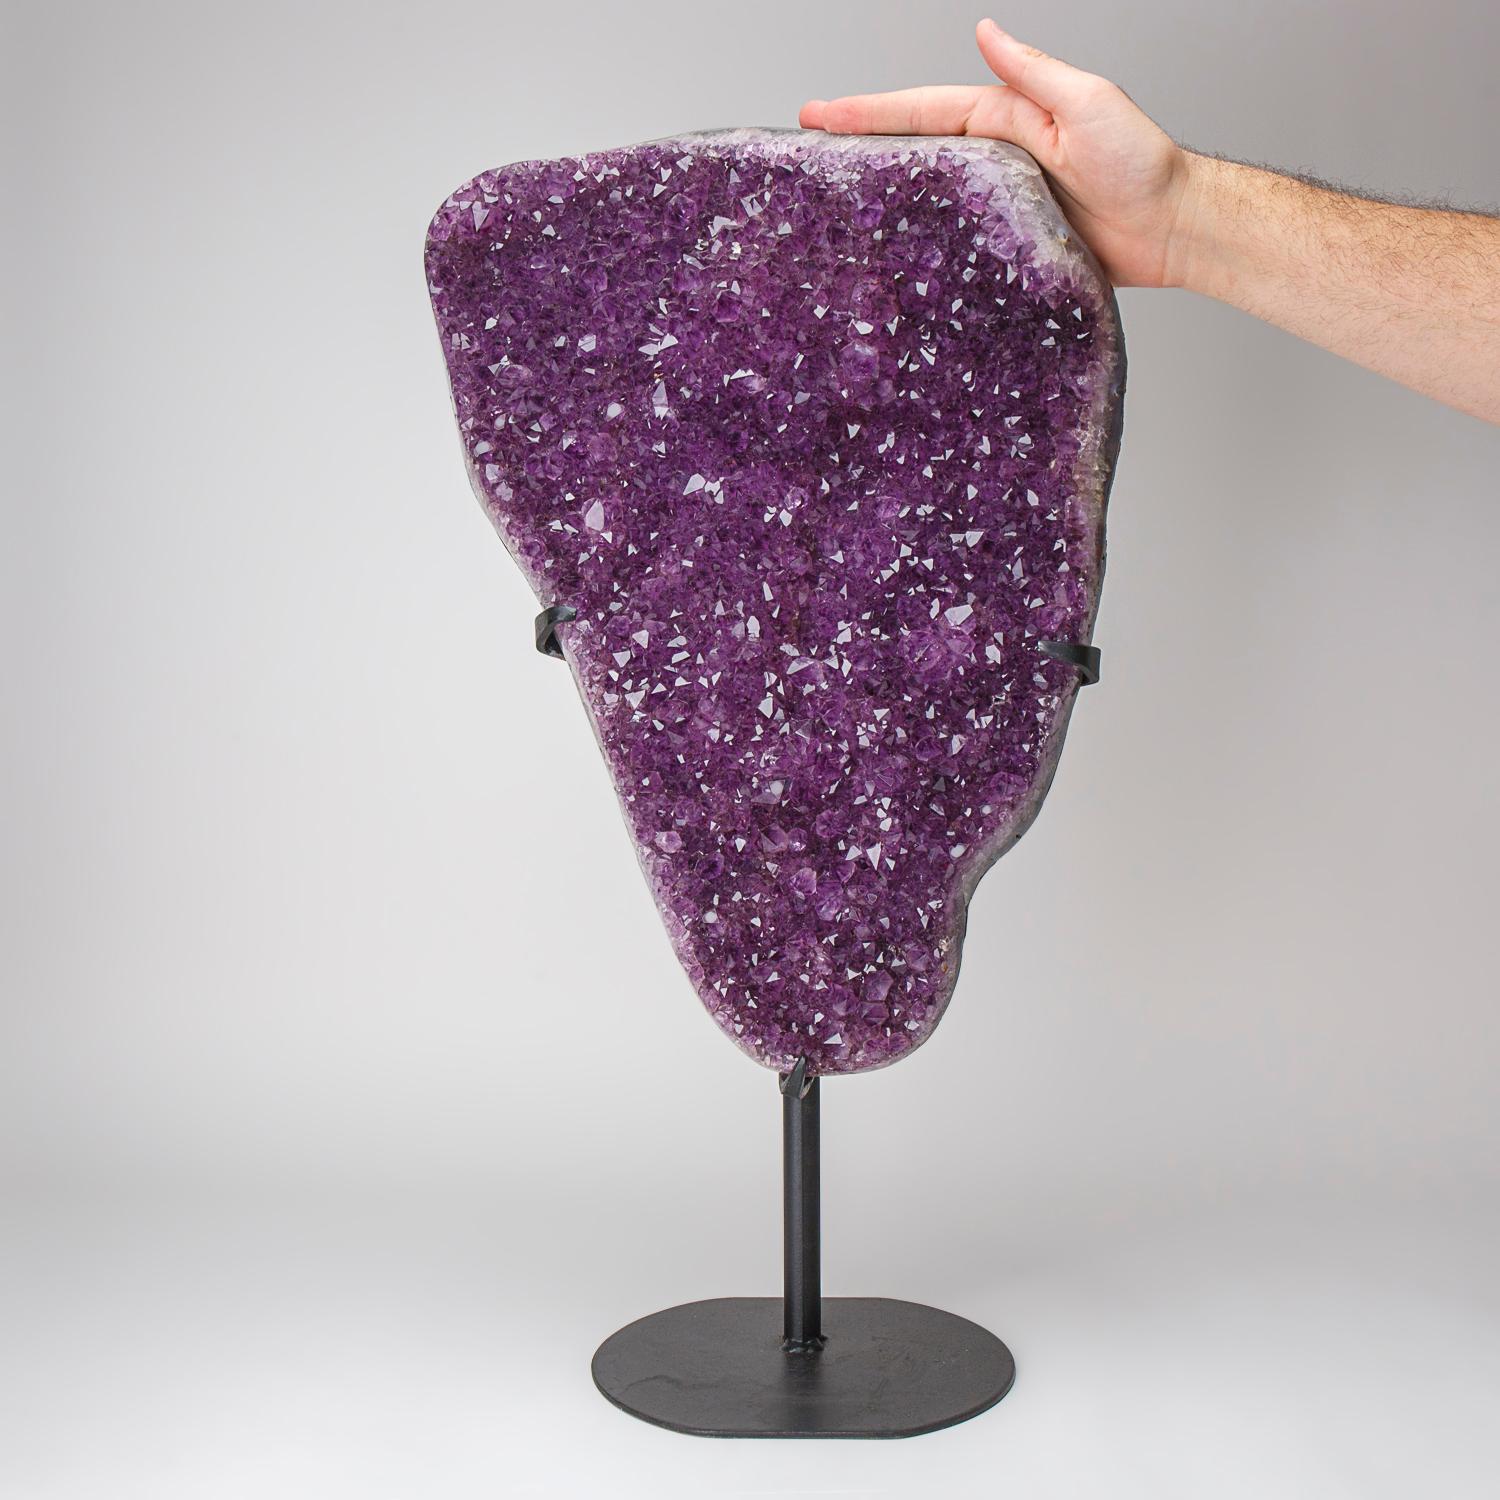 Brazilian Genuine Amethyst Crystal Cluster on Stand from Brazil (32.5 lbs) For Sale